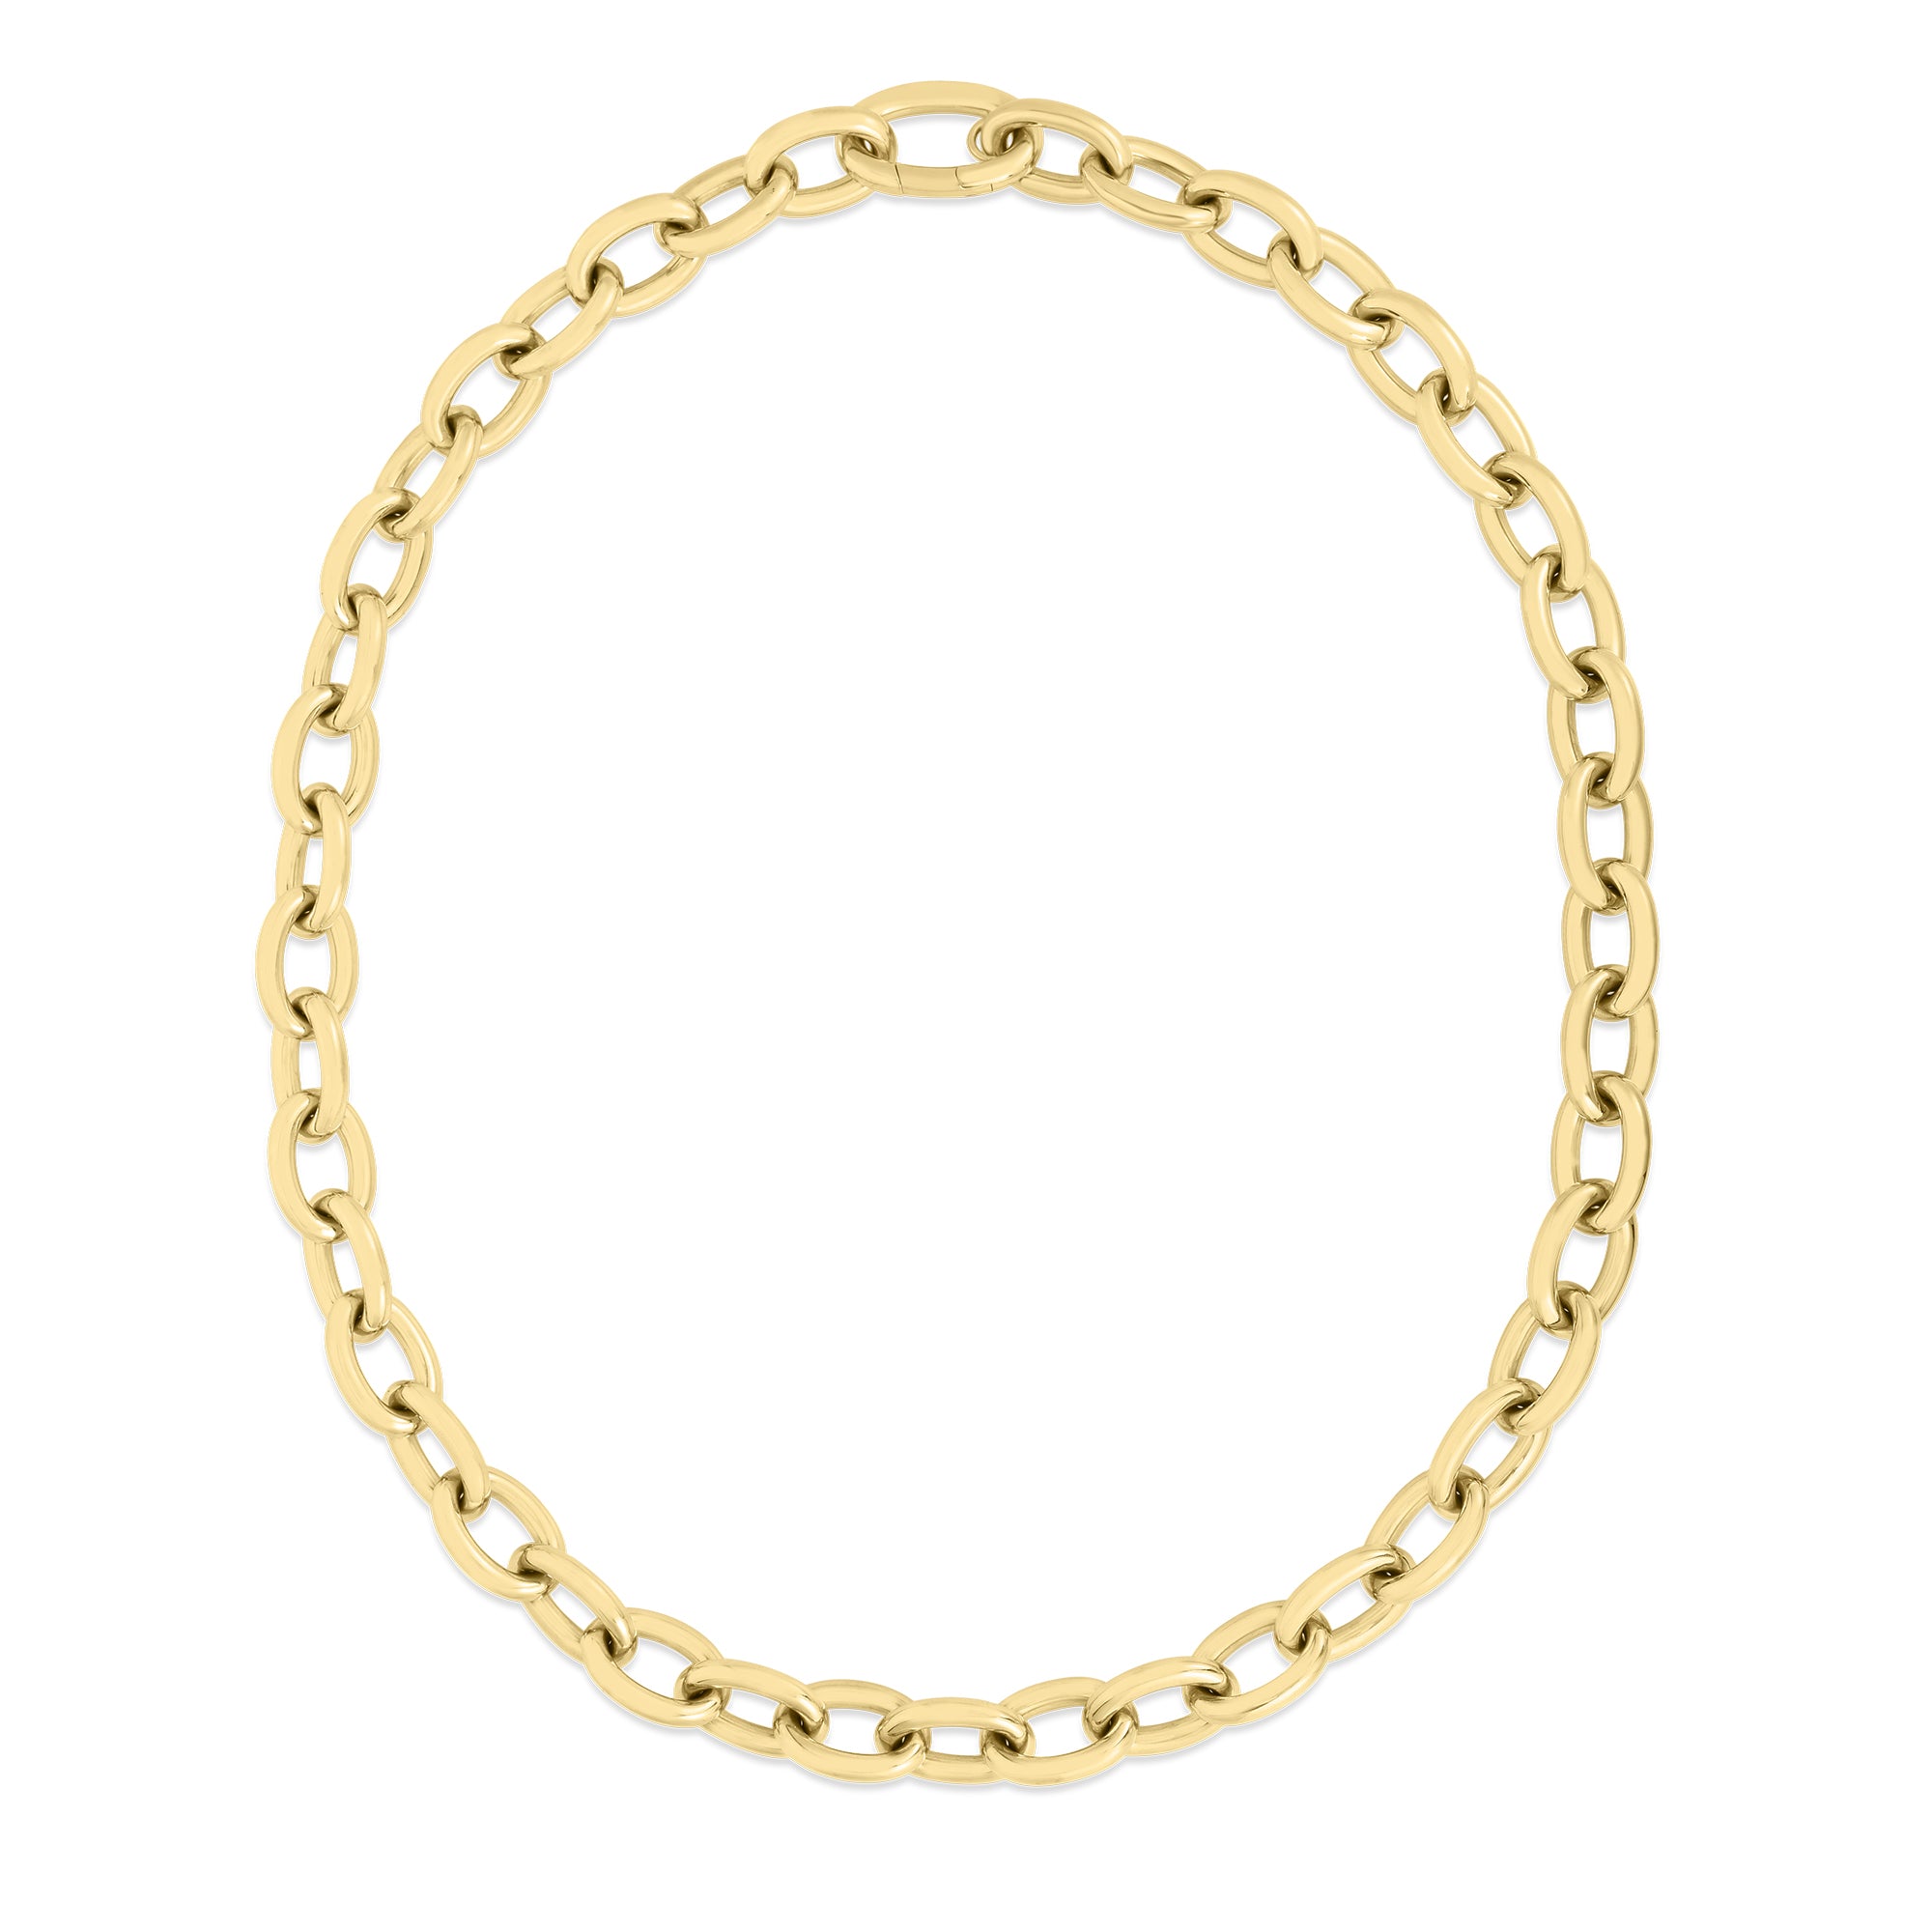 Roberto Coin 18k Yellow Gold Link Plain Necklace